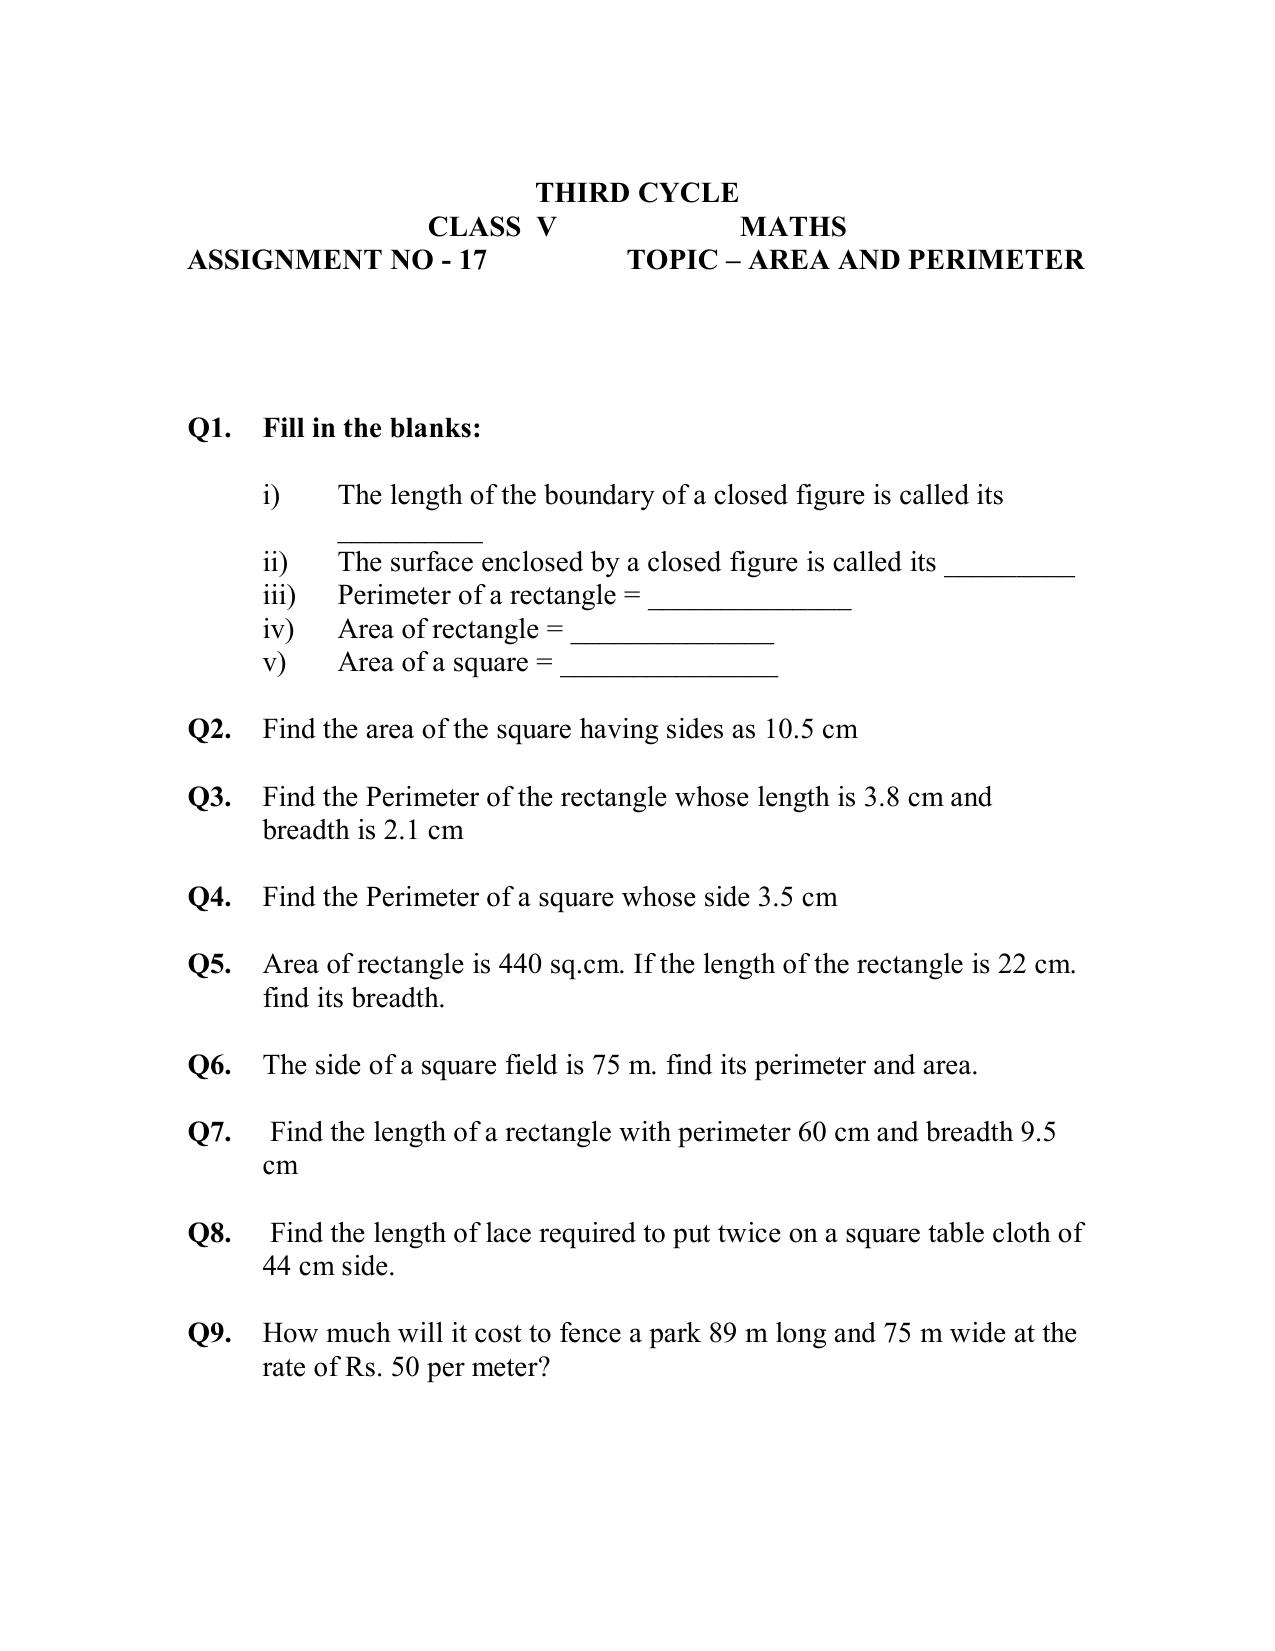 Worksheet for Class 5 Maths Assignment 20 - Page 1